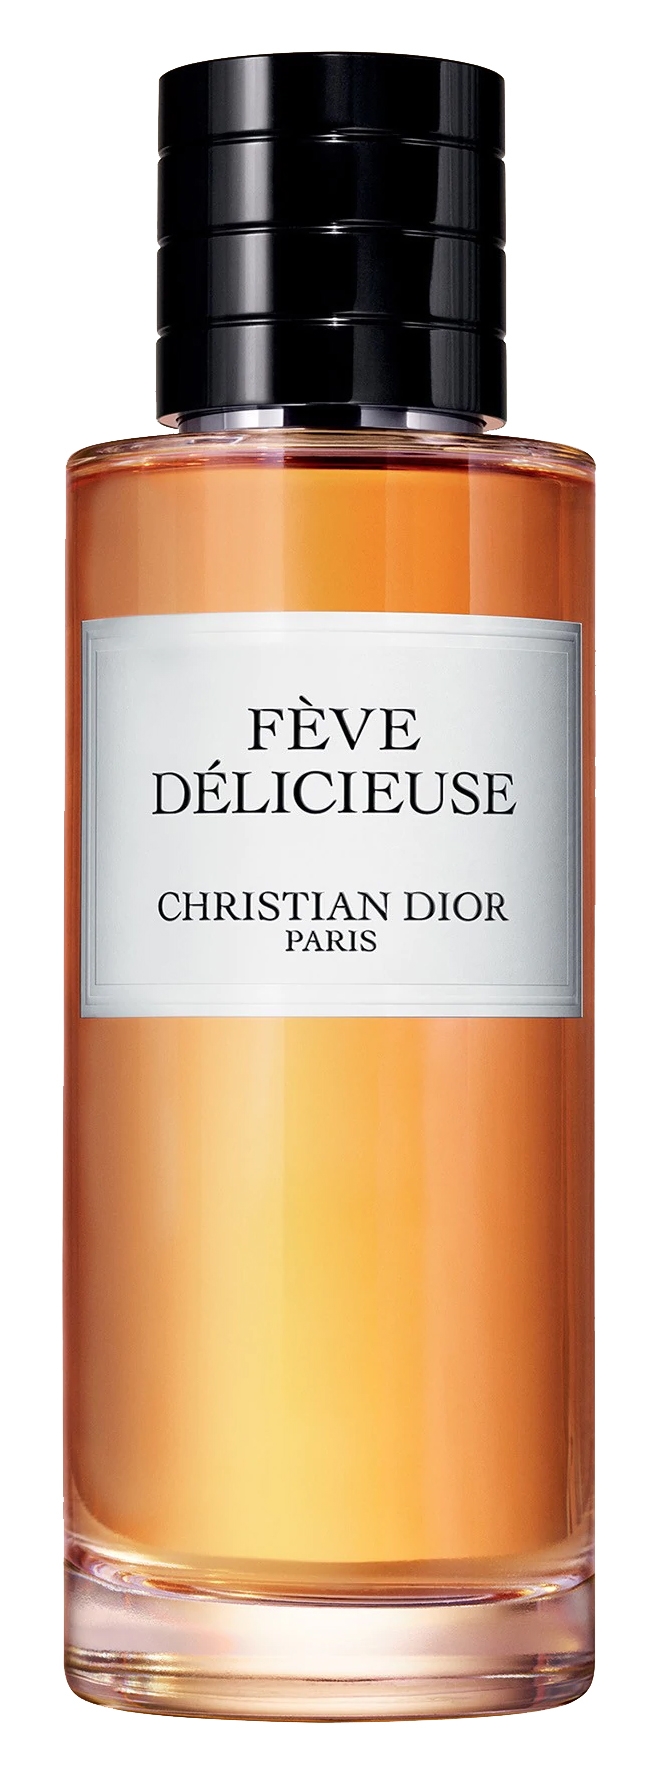 christian dior feve delicieuse review